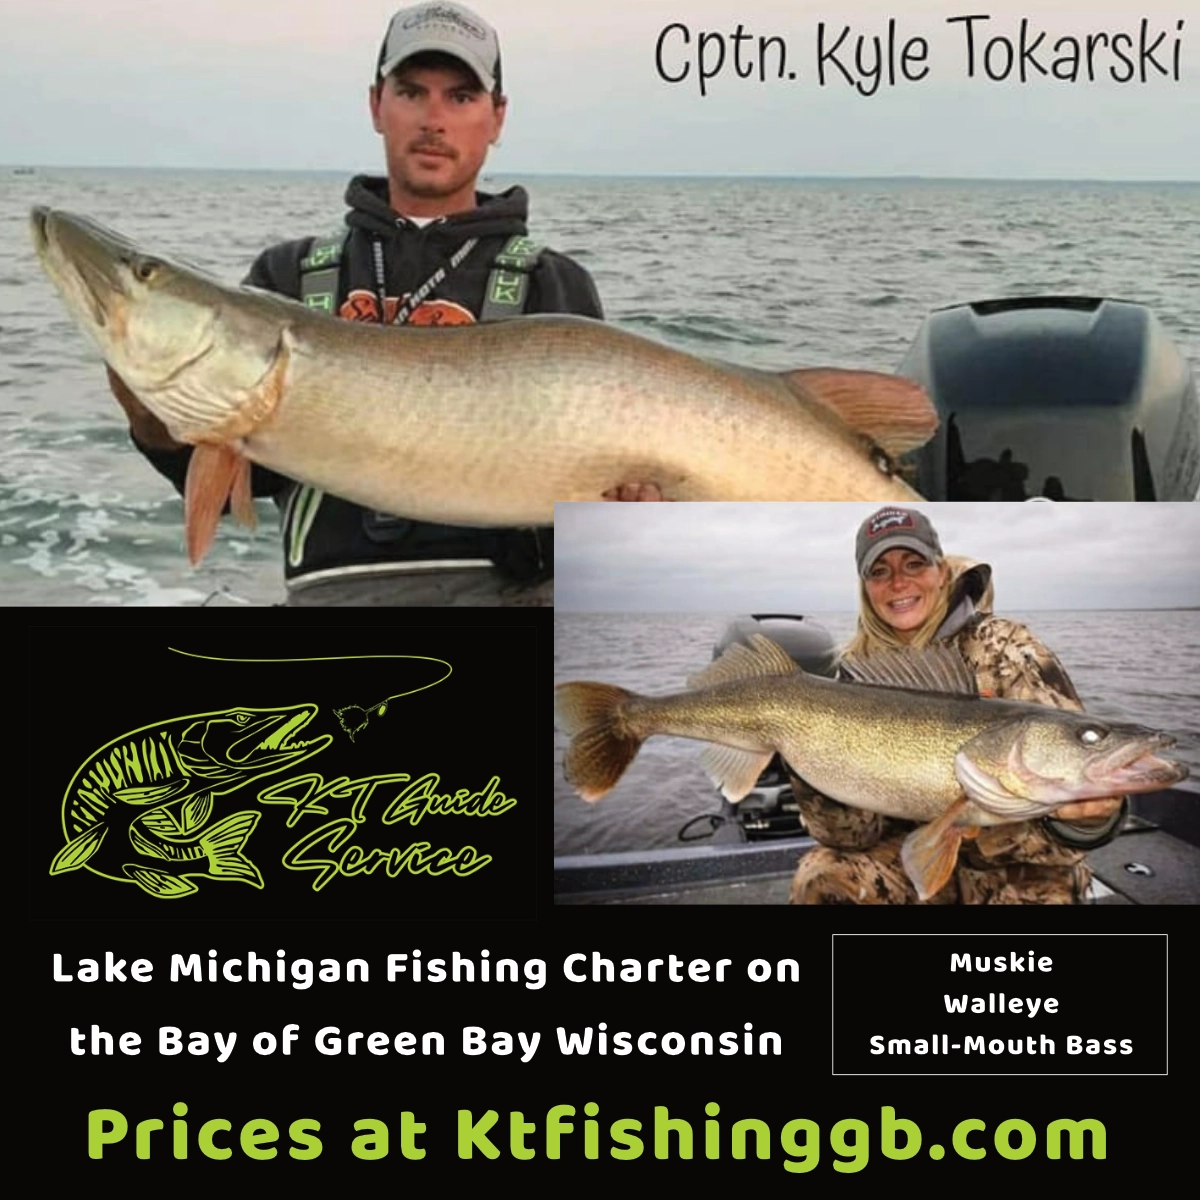 KT Guide Service - Lake Michigan Fishing Charter on the bay of Green Bay, WI. Call to book 715-340-2288.  Visit Website